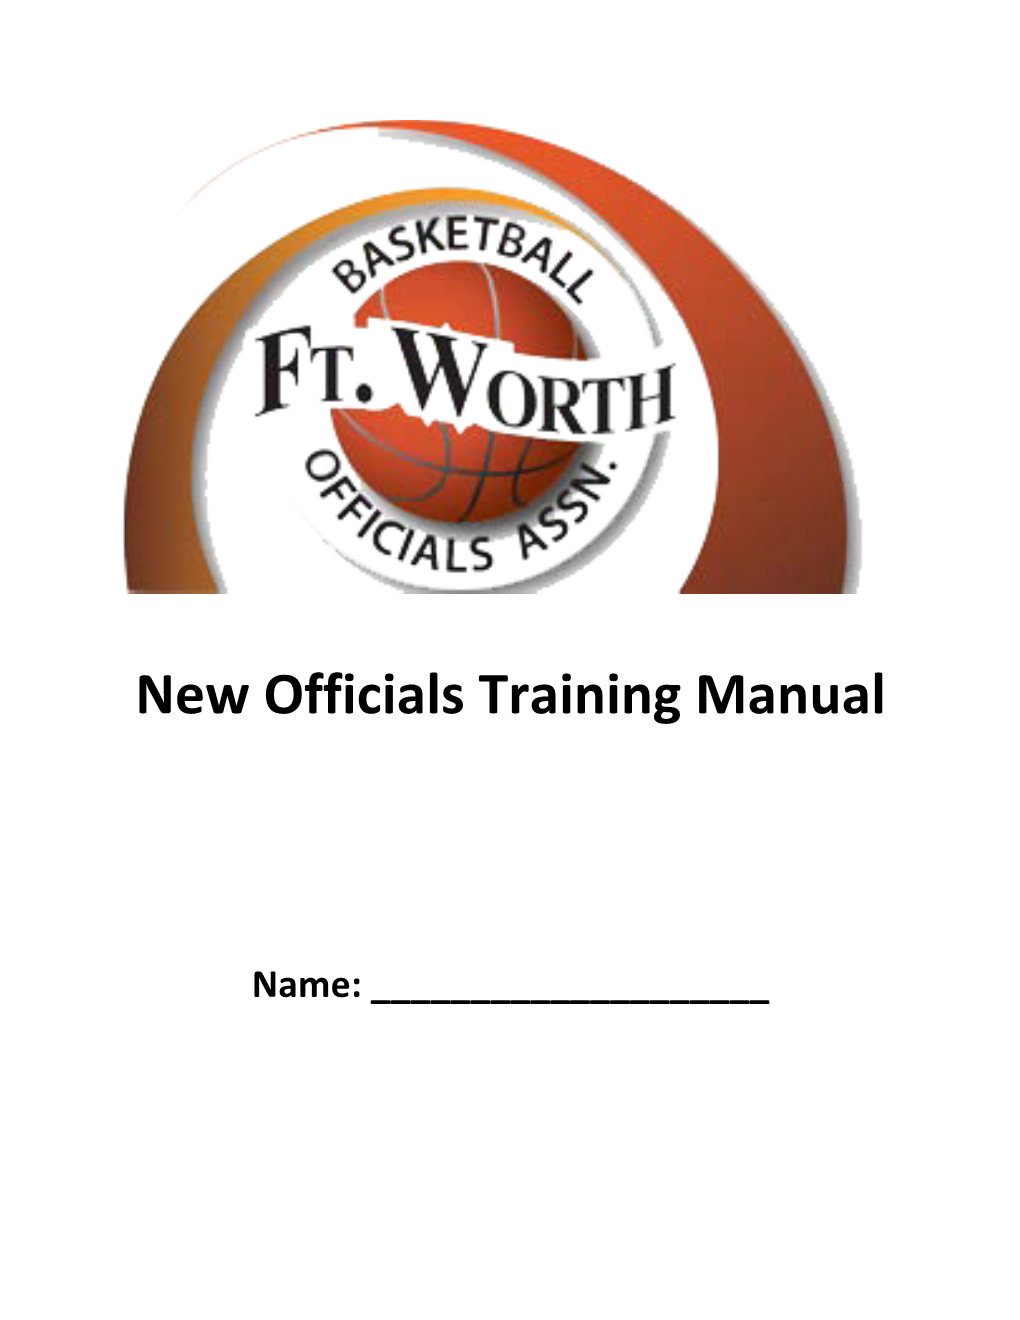 New Officials Training Manual